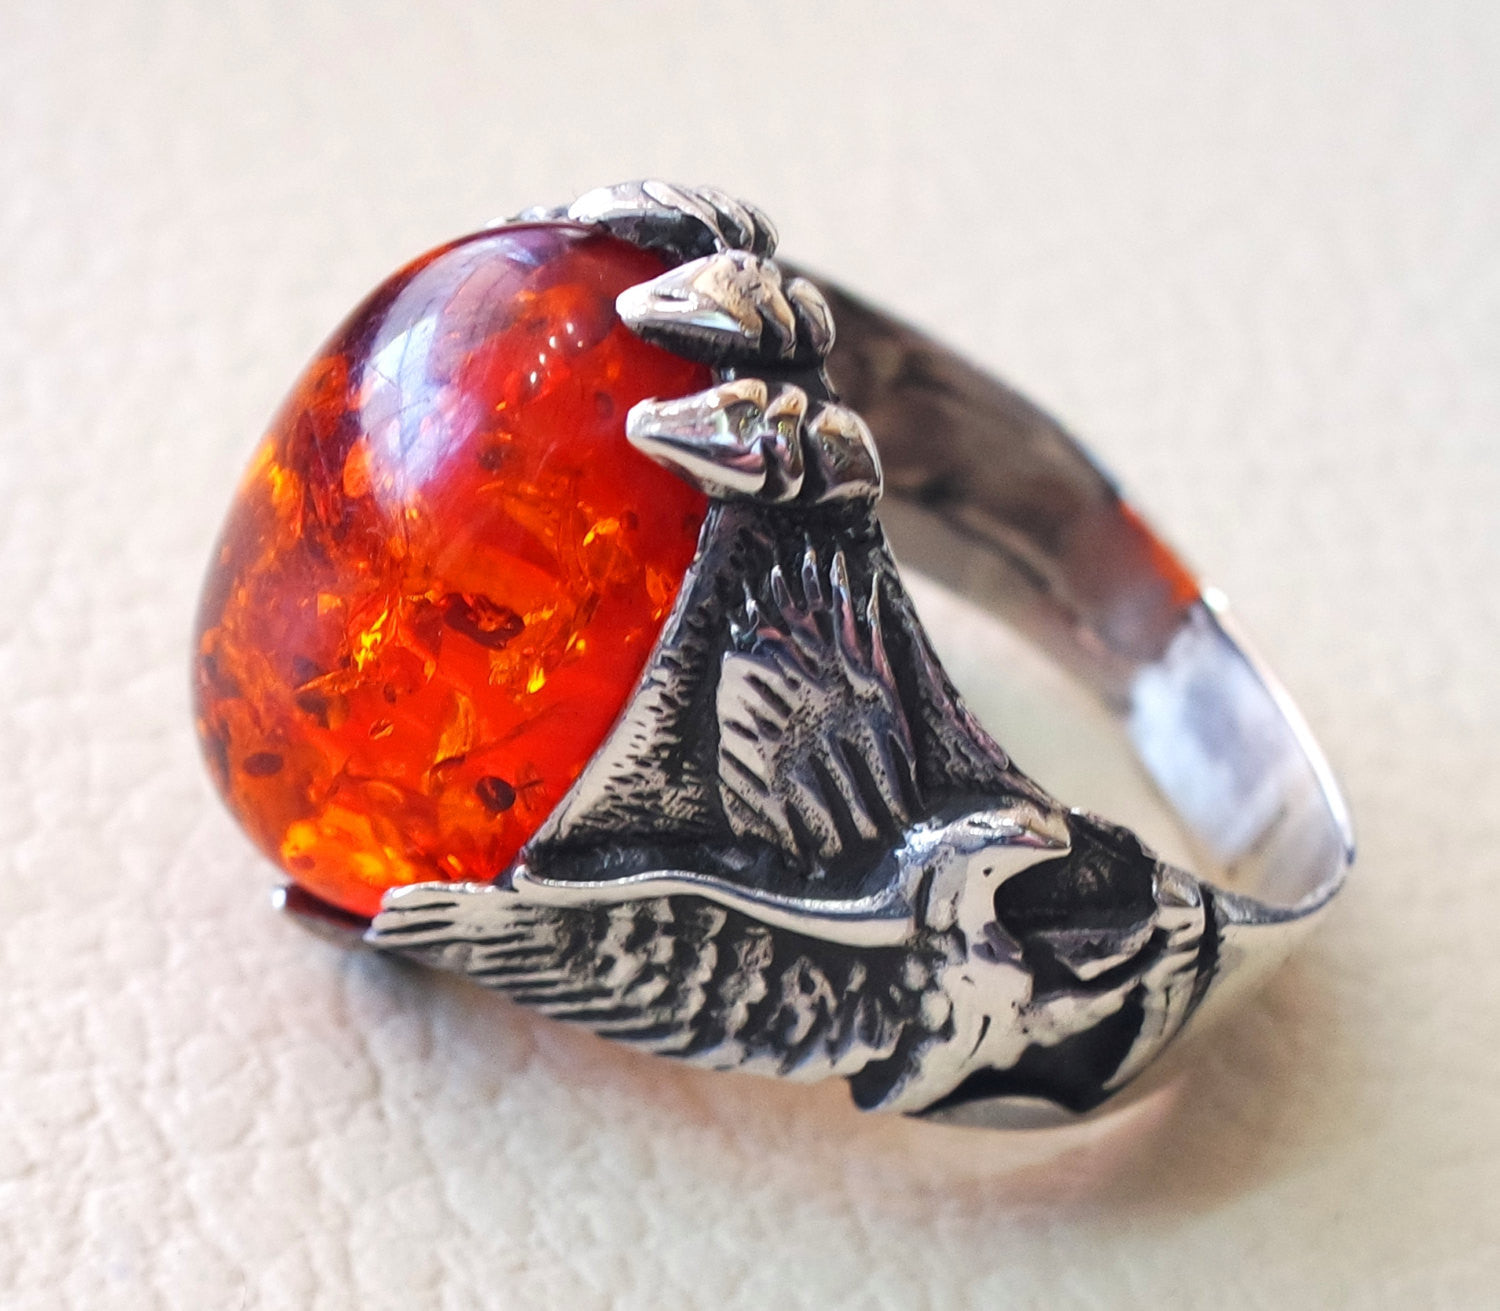 Baltic amber high quality imitation stone identical to genuine eagle man ring sterling silver 925 all sizes fast shipping animal jewelry